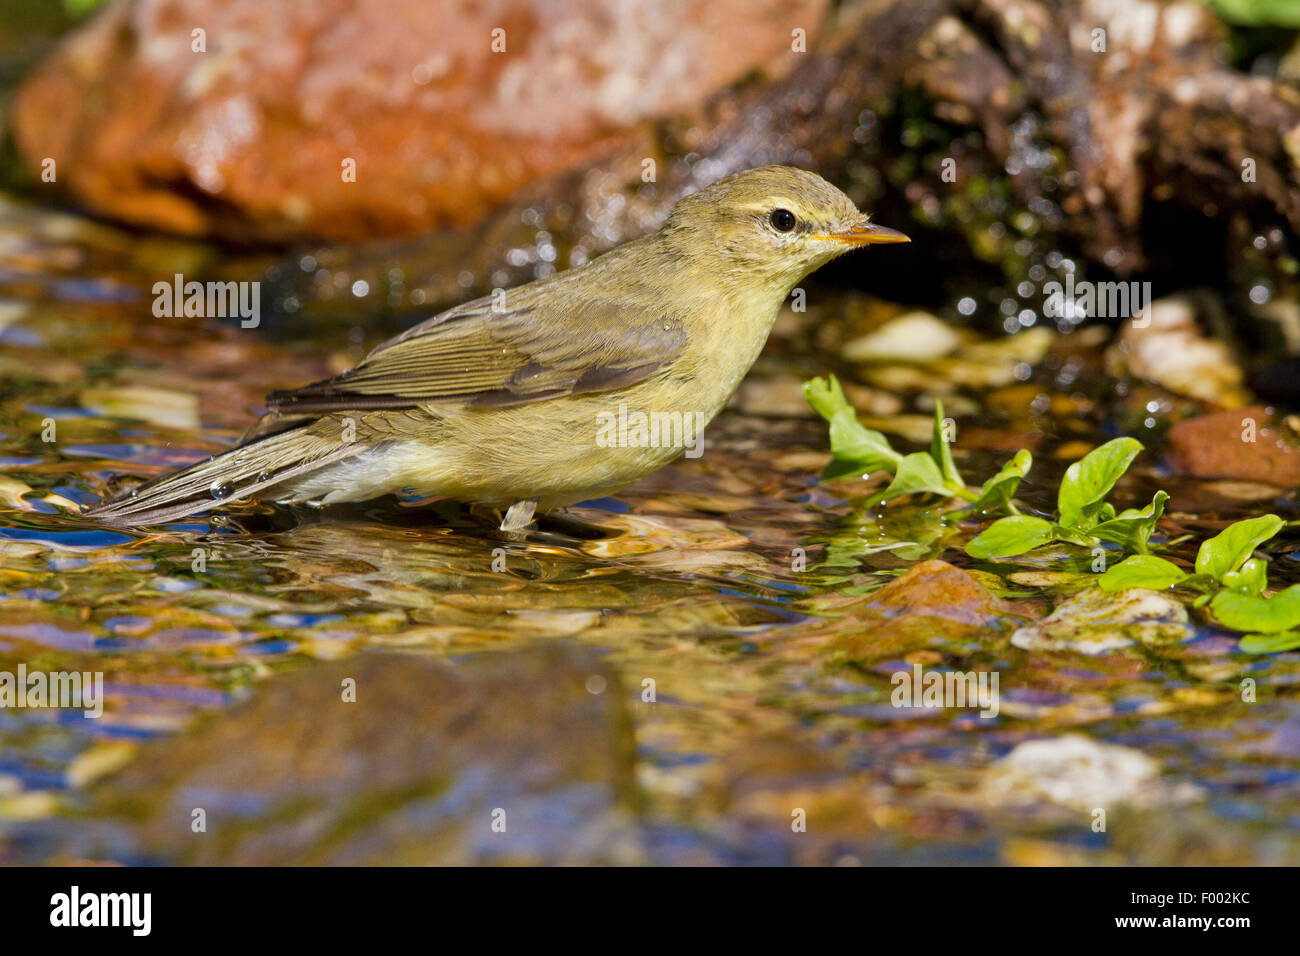 willow warbler (Phylloscopus trochilus), at a brookside, Germany, Mecklenburg-Western Pomerania Stock Photo